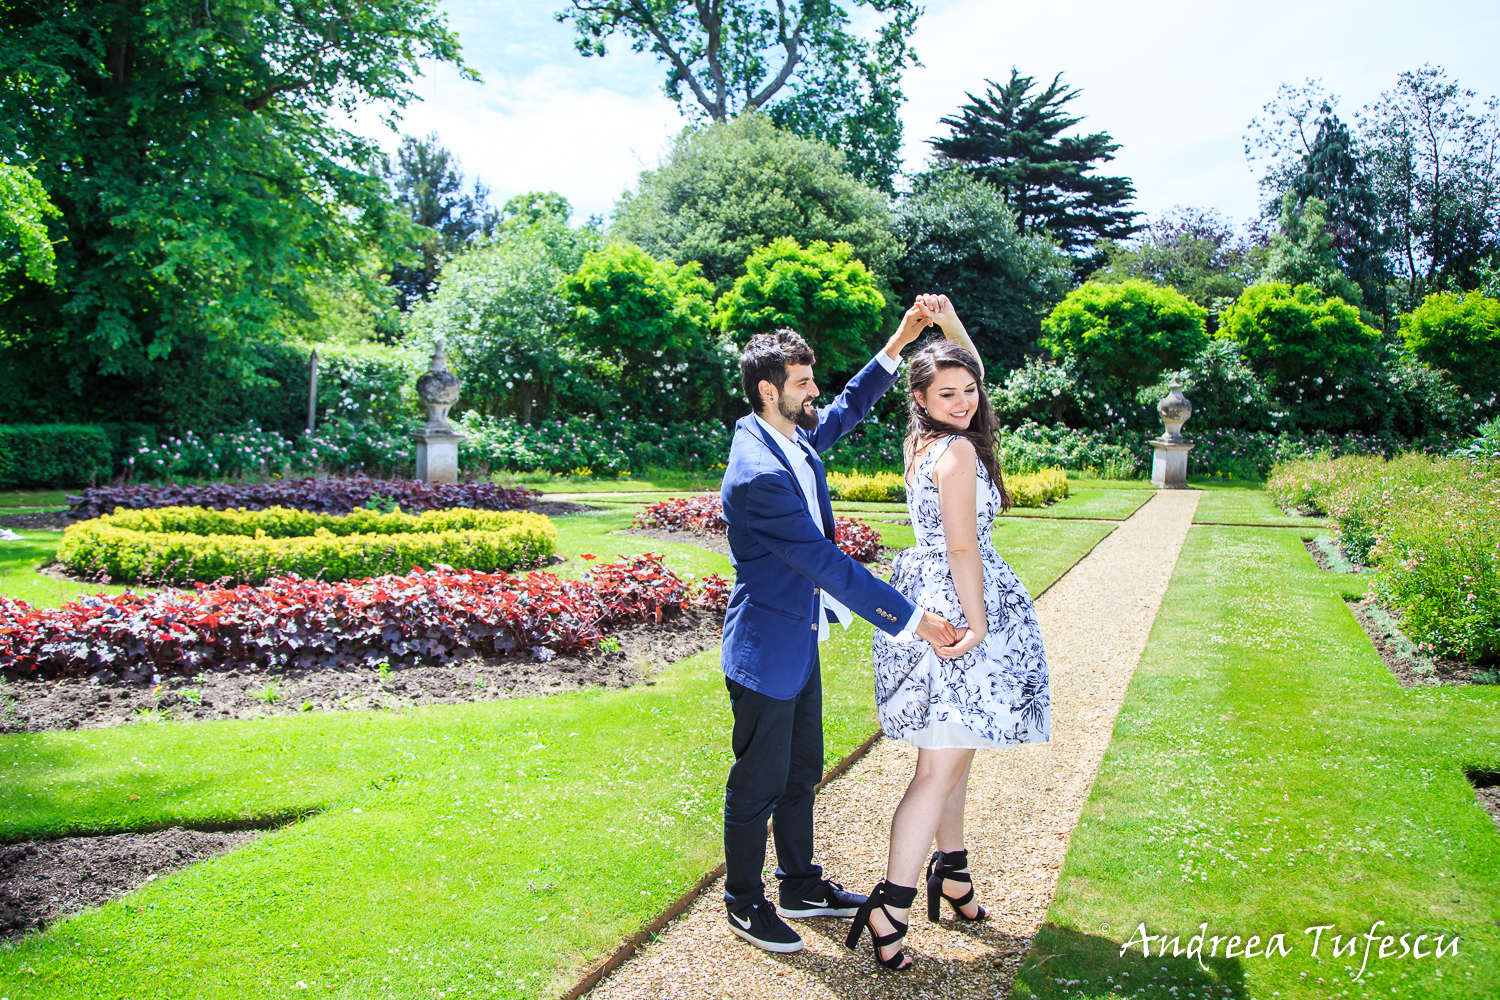  Wedding and Engagement Photography by Andreea Tufescu - L & D Engagement - PreWedding Photoshoot West London Chiswick 